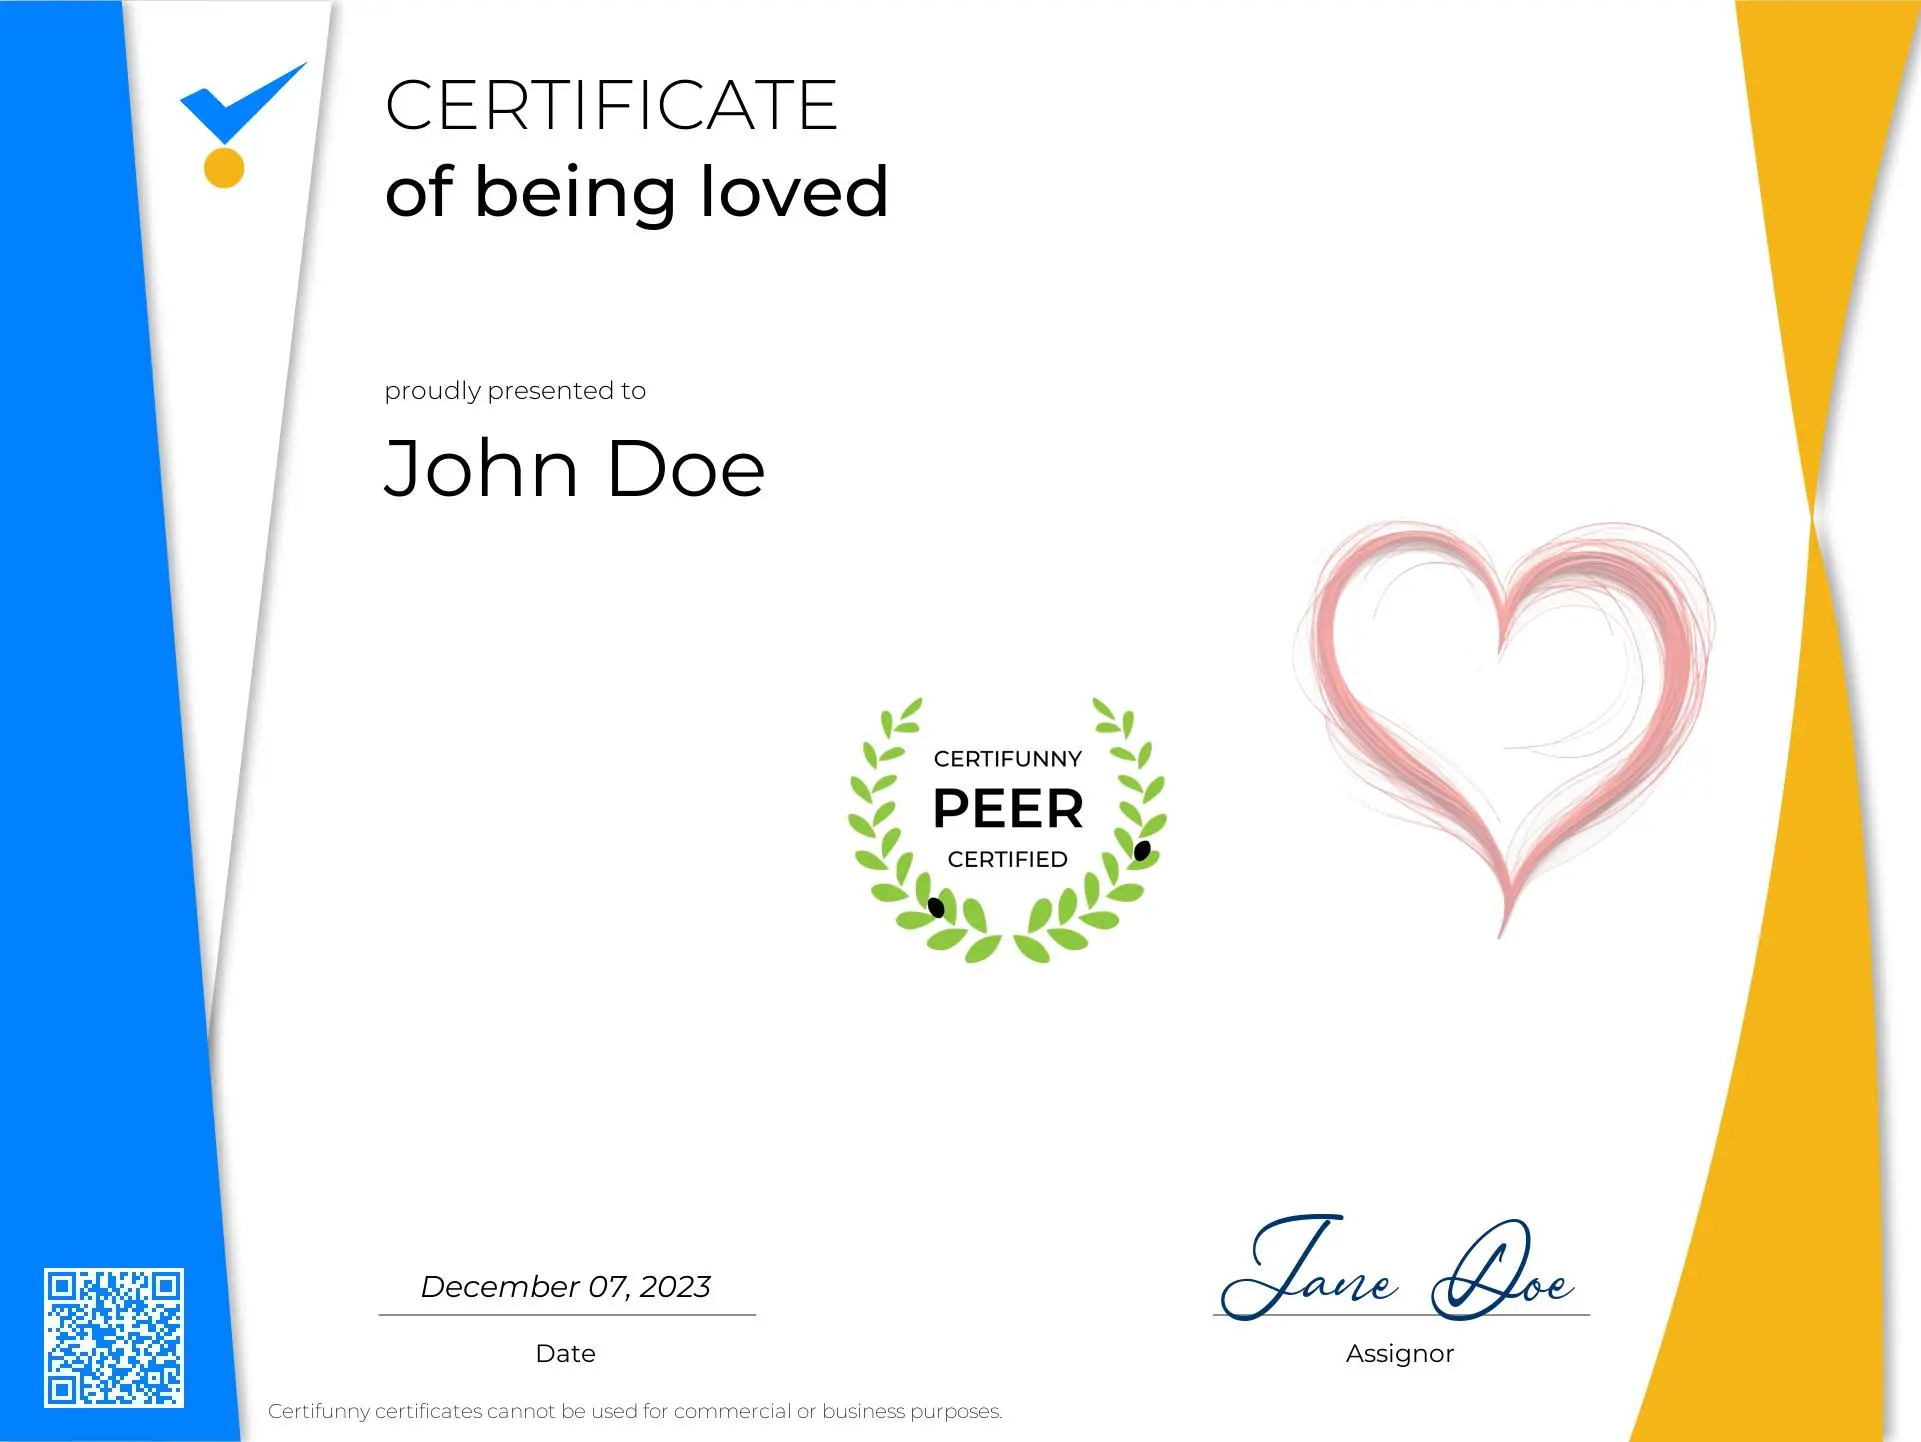 Being loved certificate